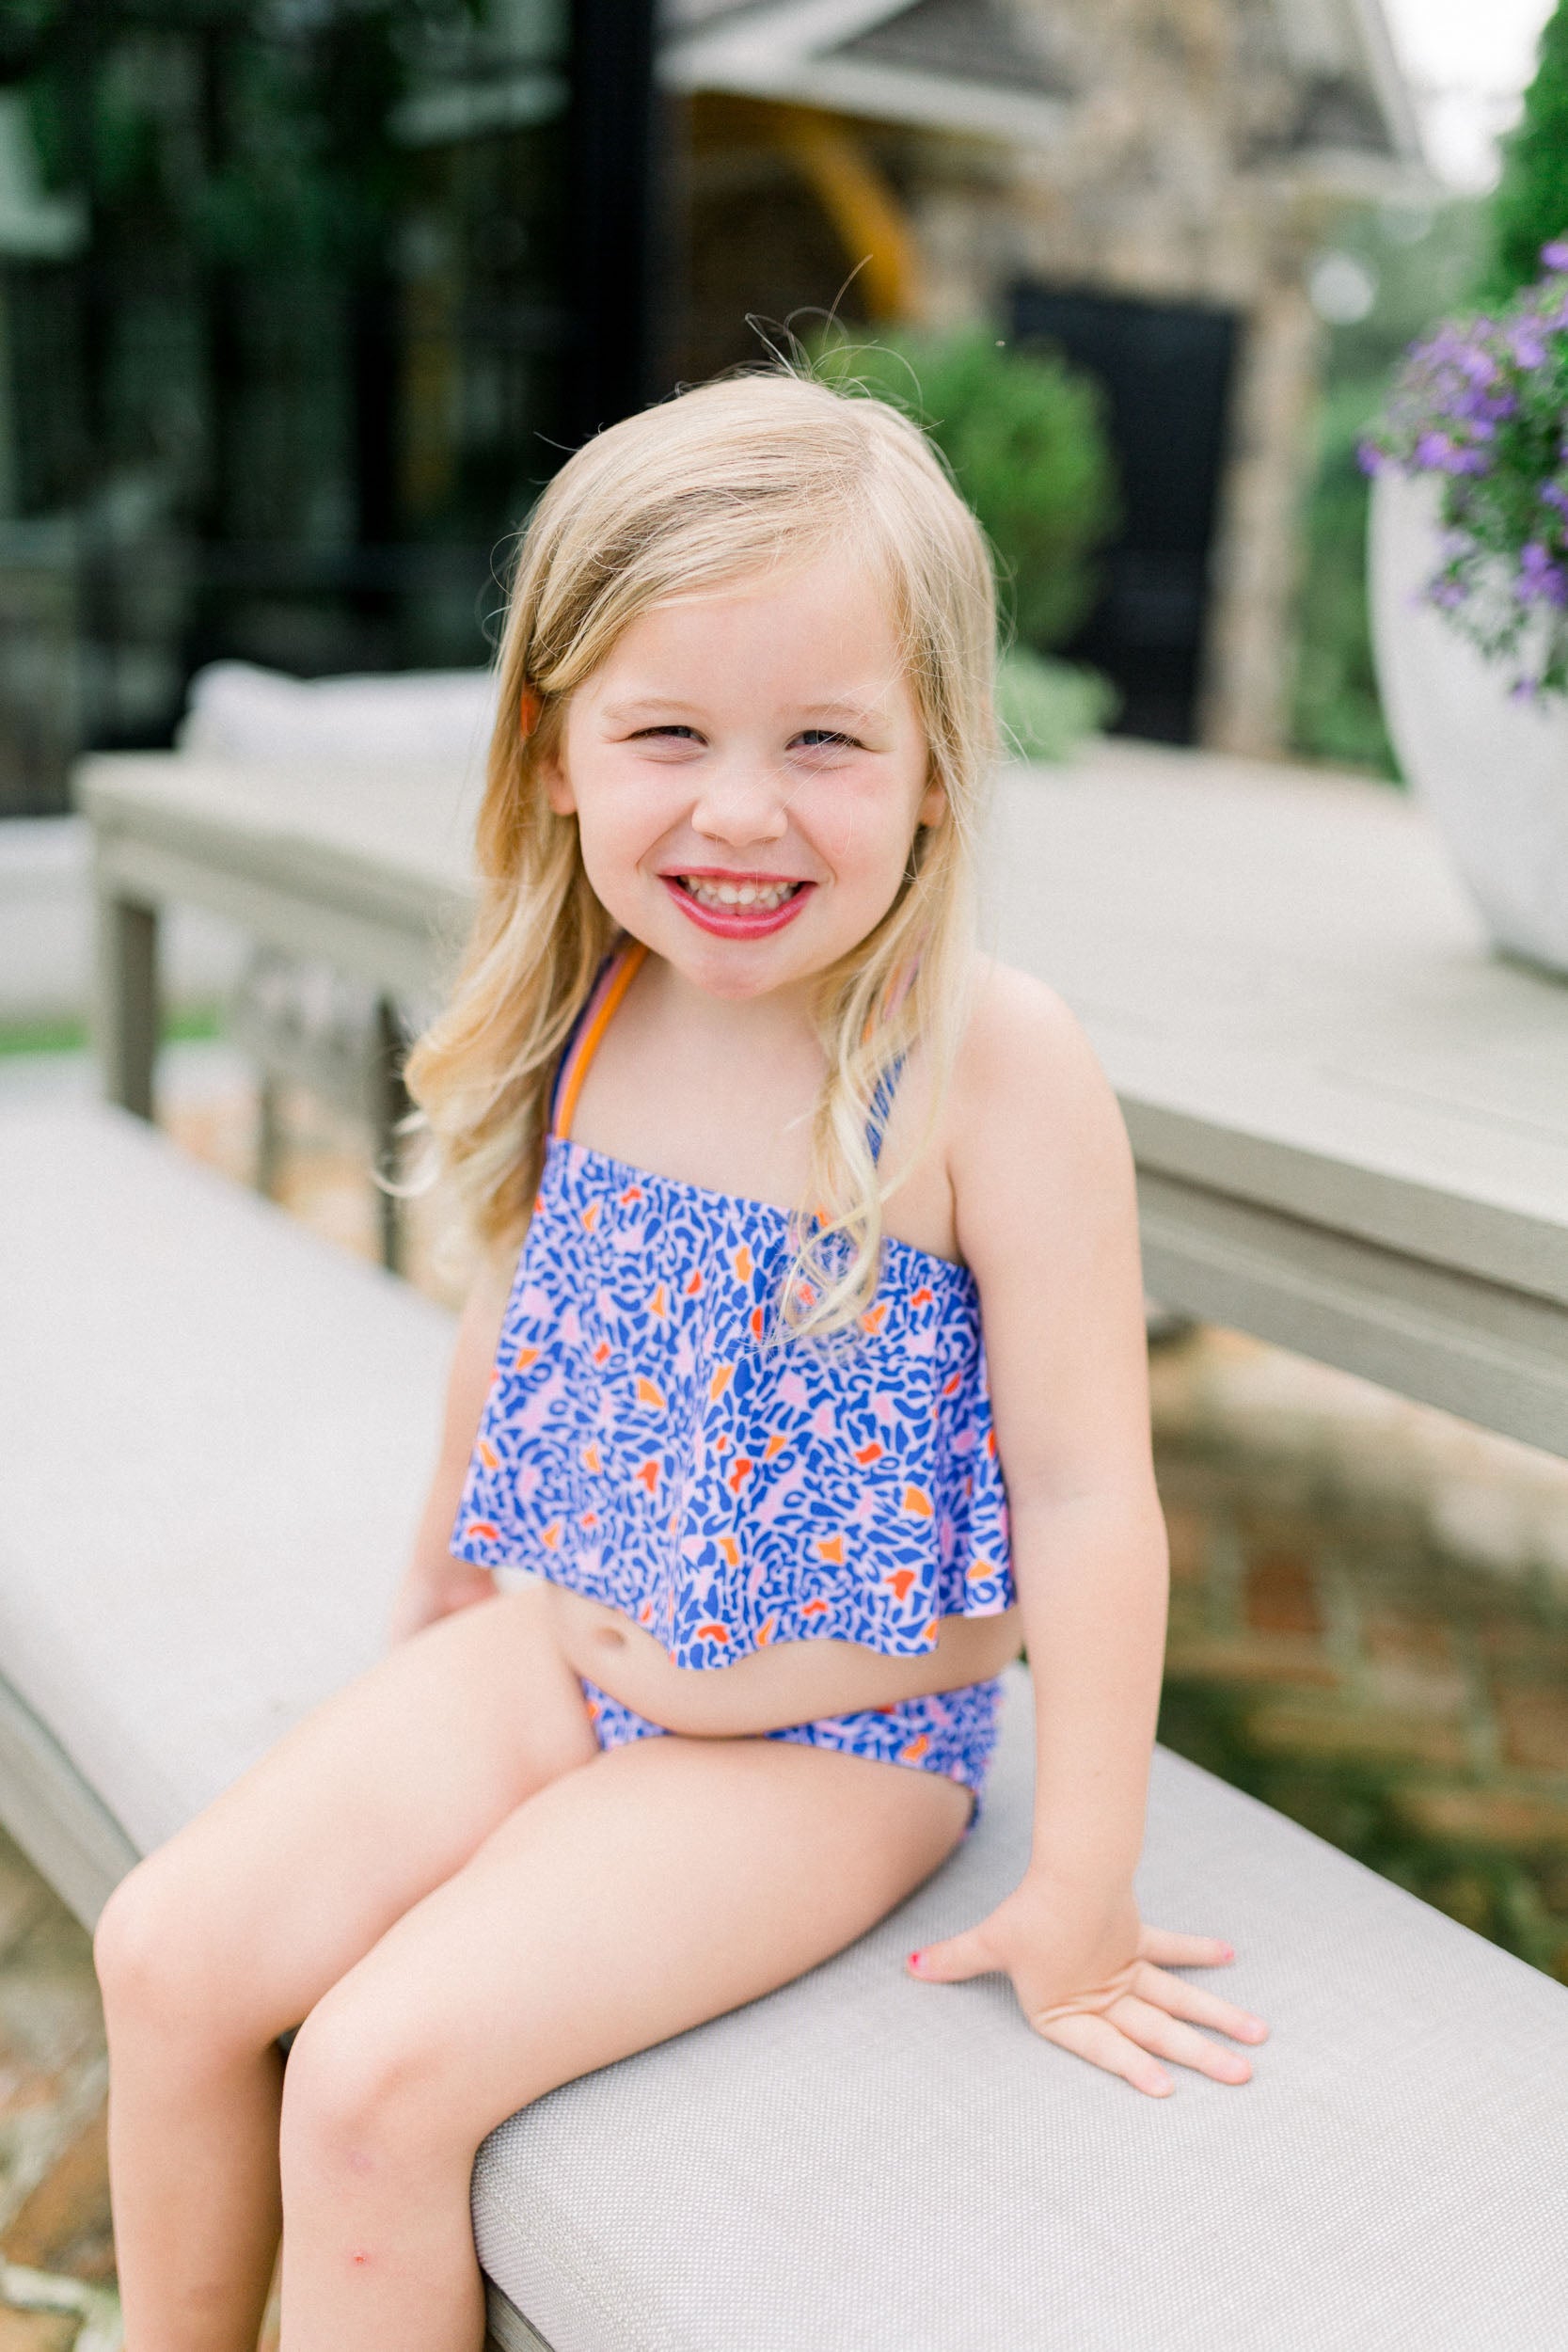 Hello Happiness Pink N' Blue Tween Two-Piece Swimsuit – The Oaks Apparel Co.